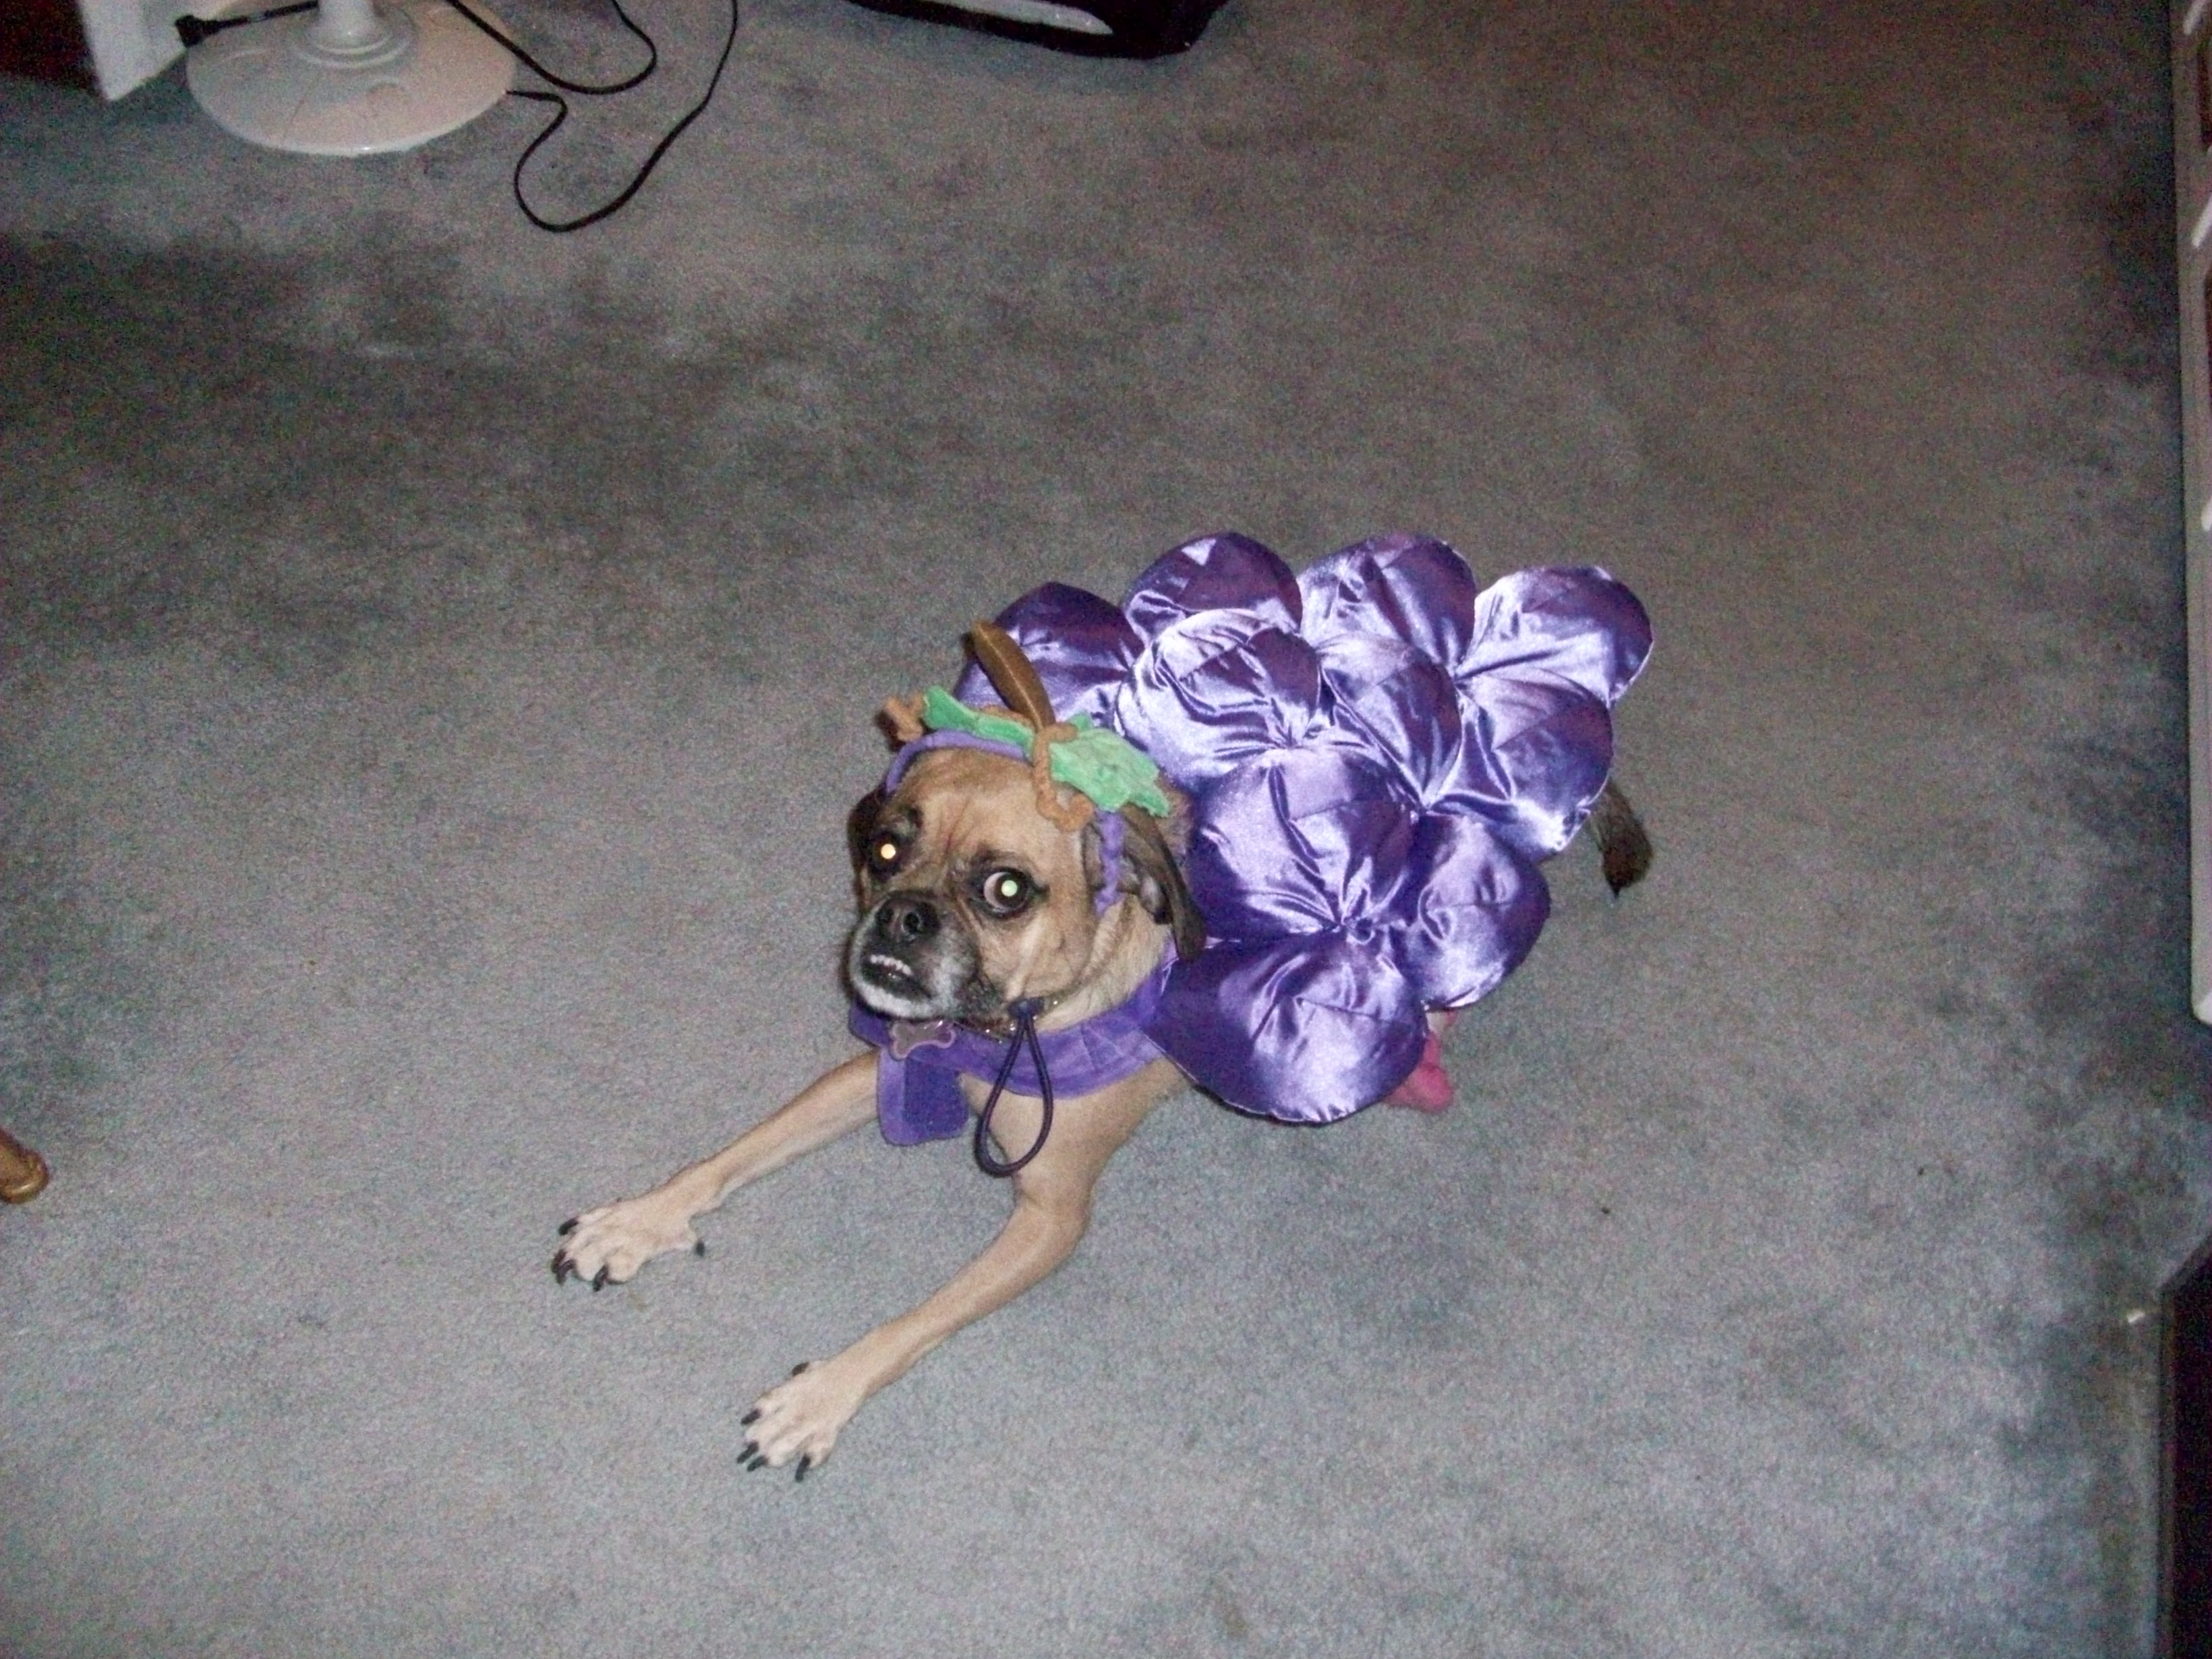 maggie-getting-ready-for-halloween-sent-by-lisa-vecchione-in-forest-hills-ny.jpg 